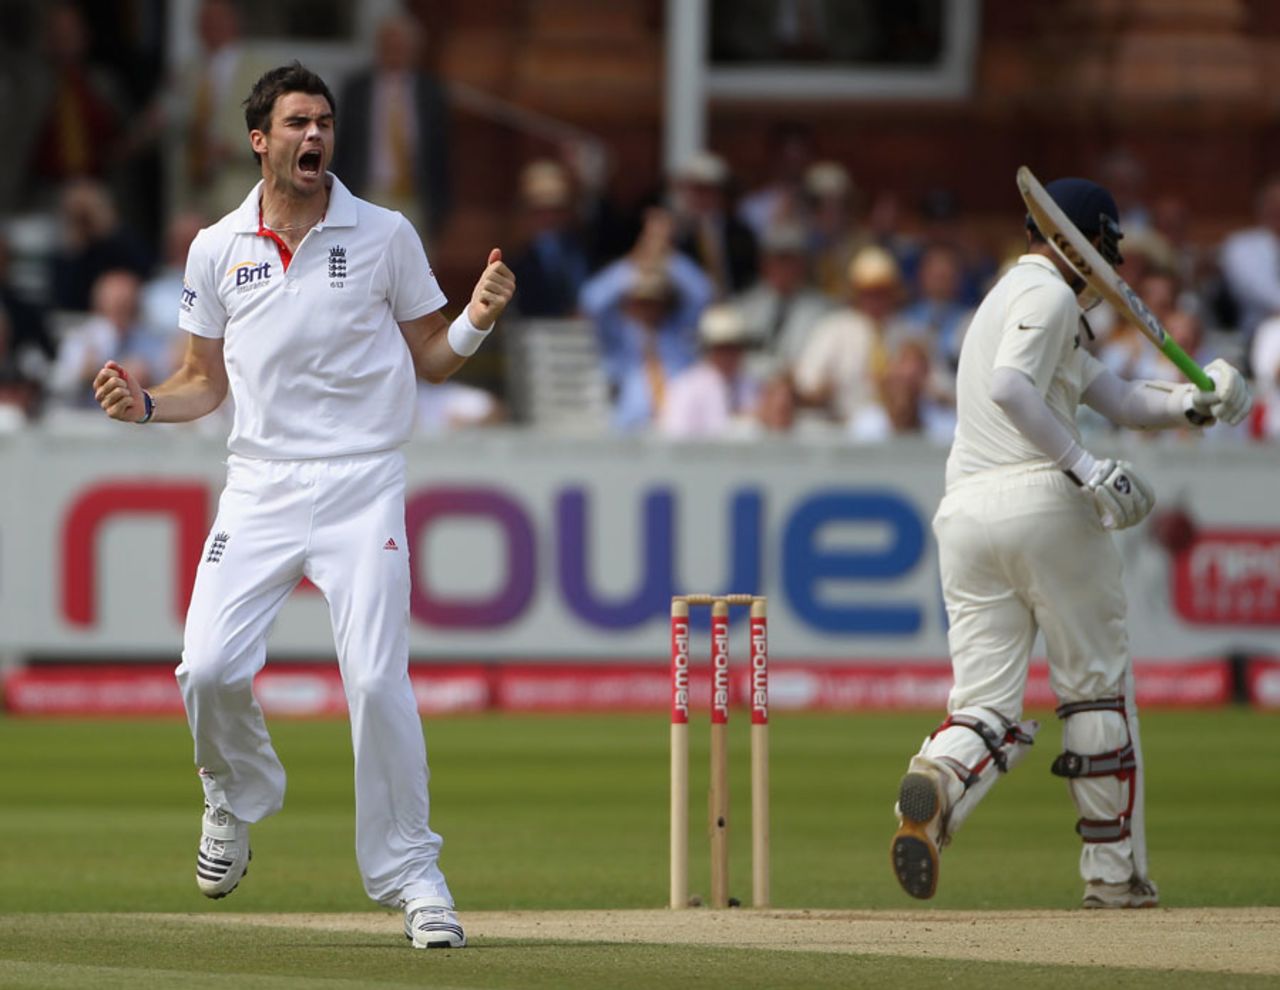 James Anderson is thrilled after removing Rahul Dravid, England v India, 1st Test, Lord's, 5th day, July 25, 2011